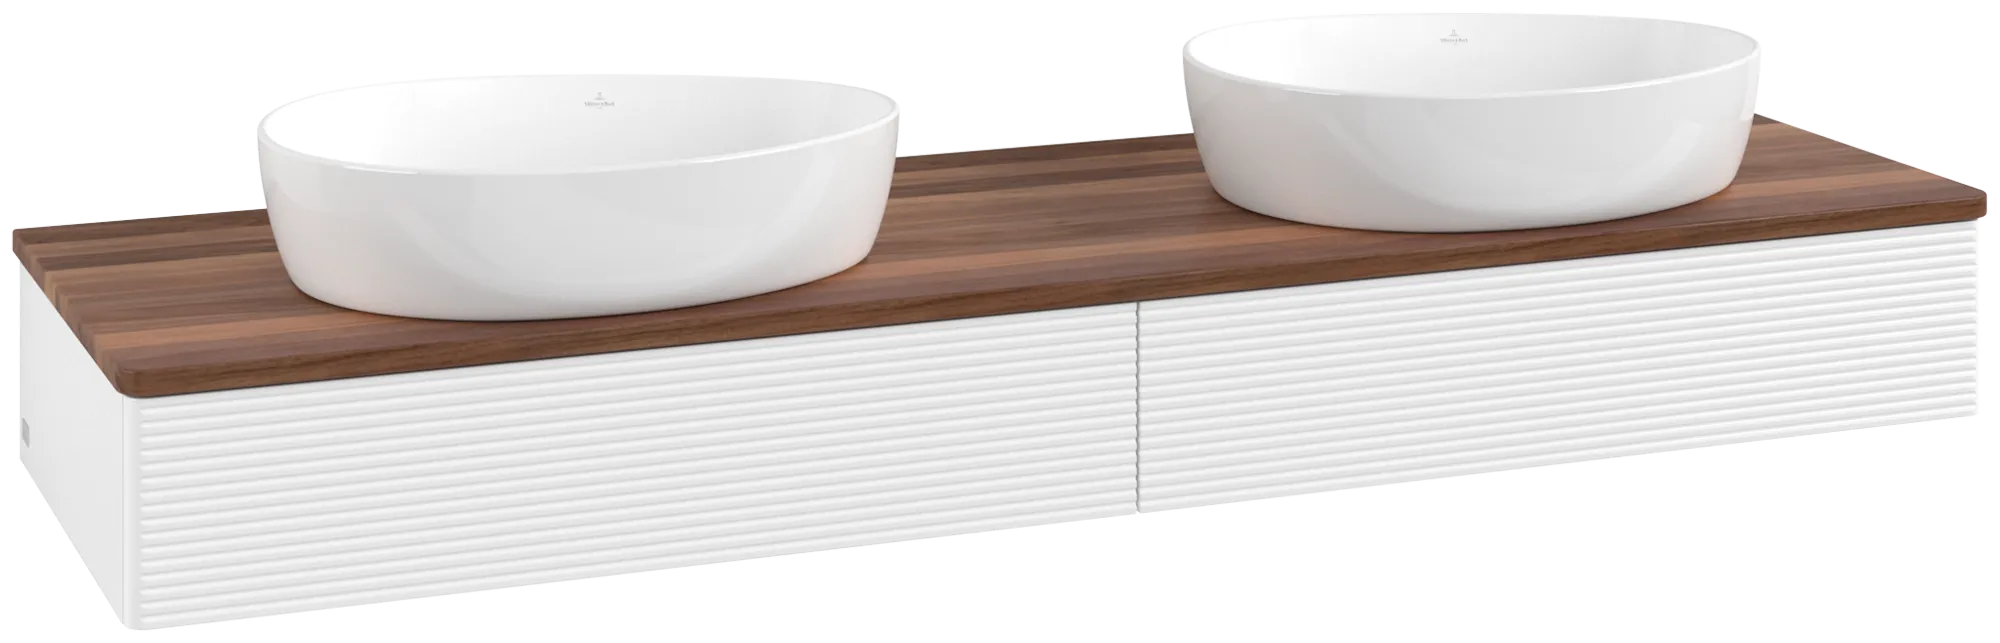 VILLEROY BOCH Antao Vanity unit, 2 pull-out compartments, 1600 x 190 x 500 mm, Front with grain texture, White Matt Lacquer / Warm Walnut #K17112MT resmi